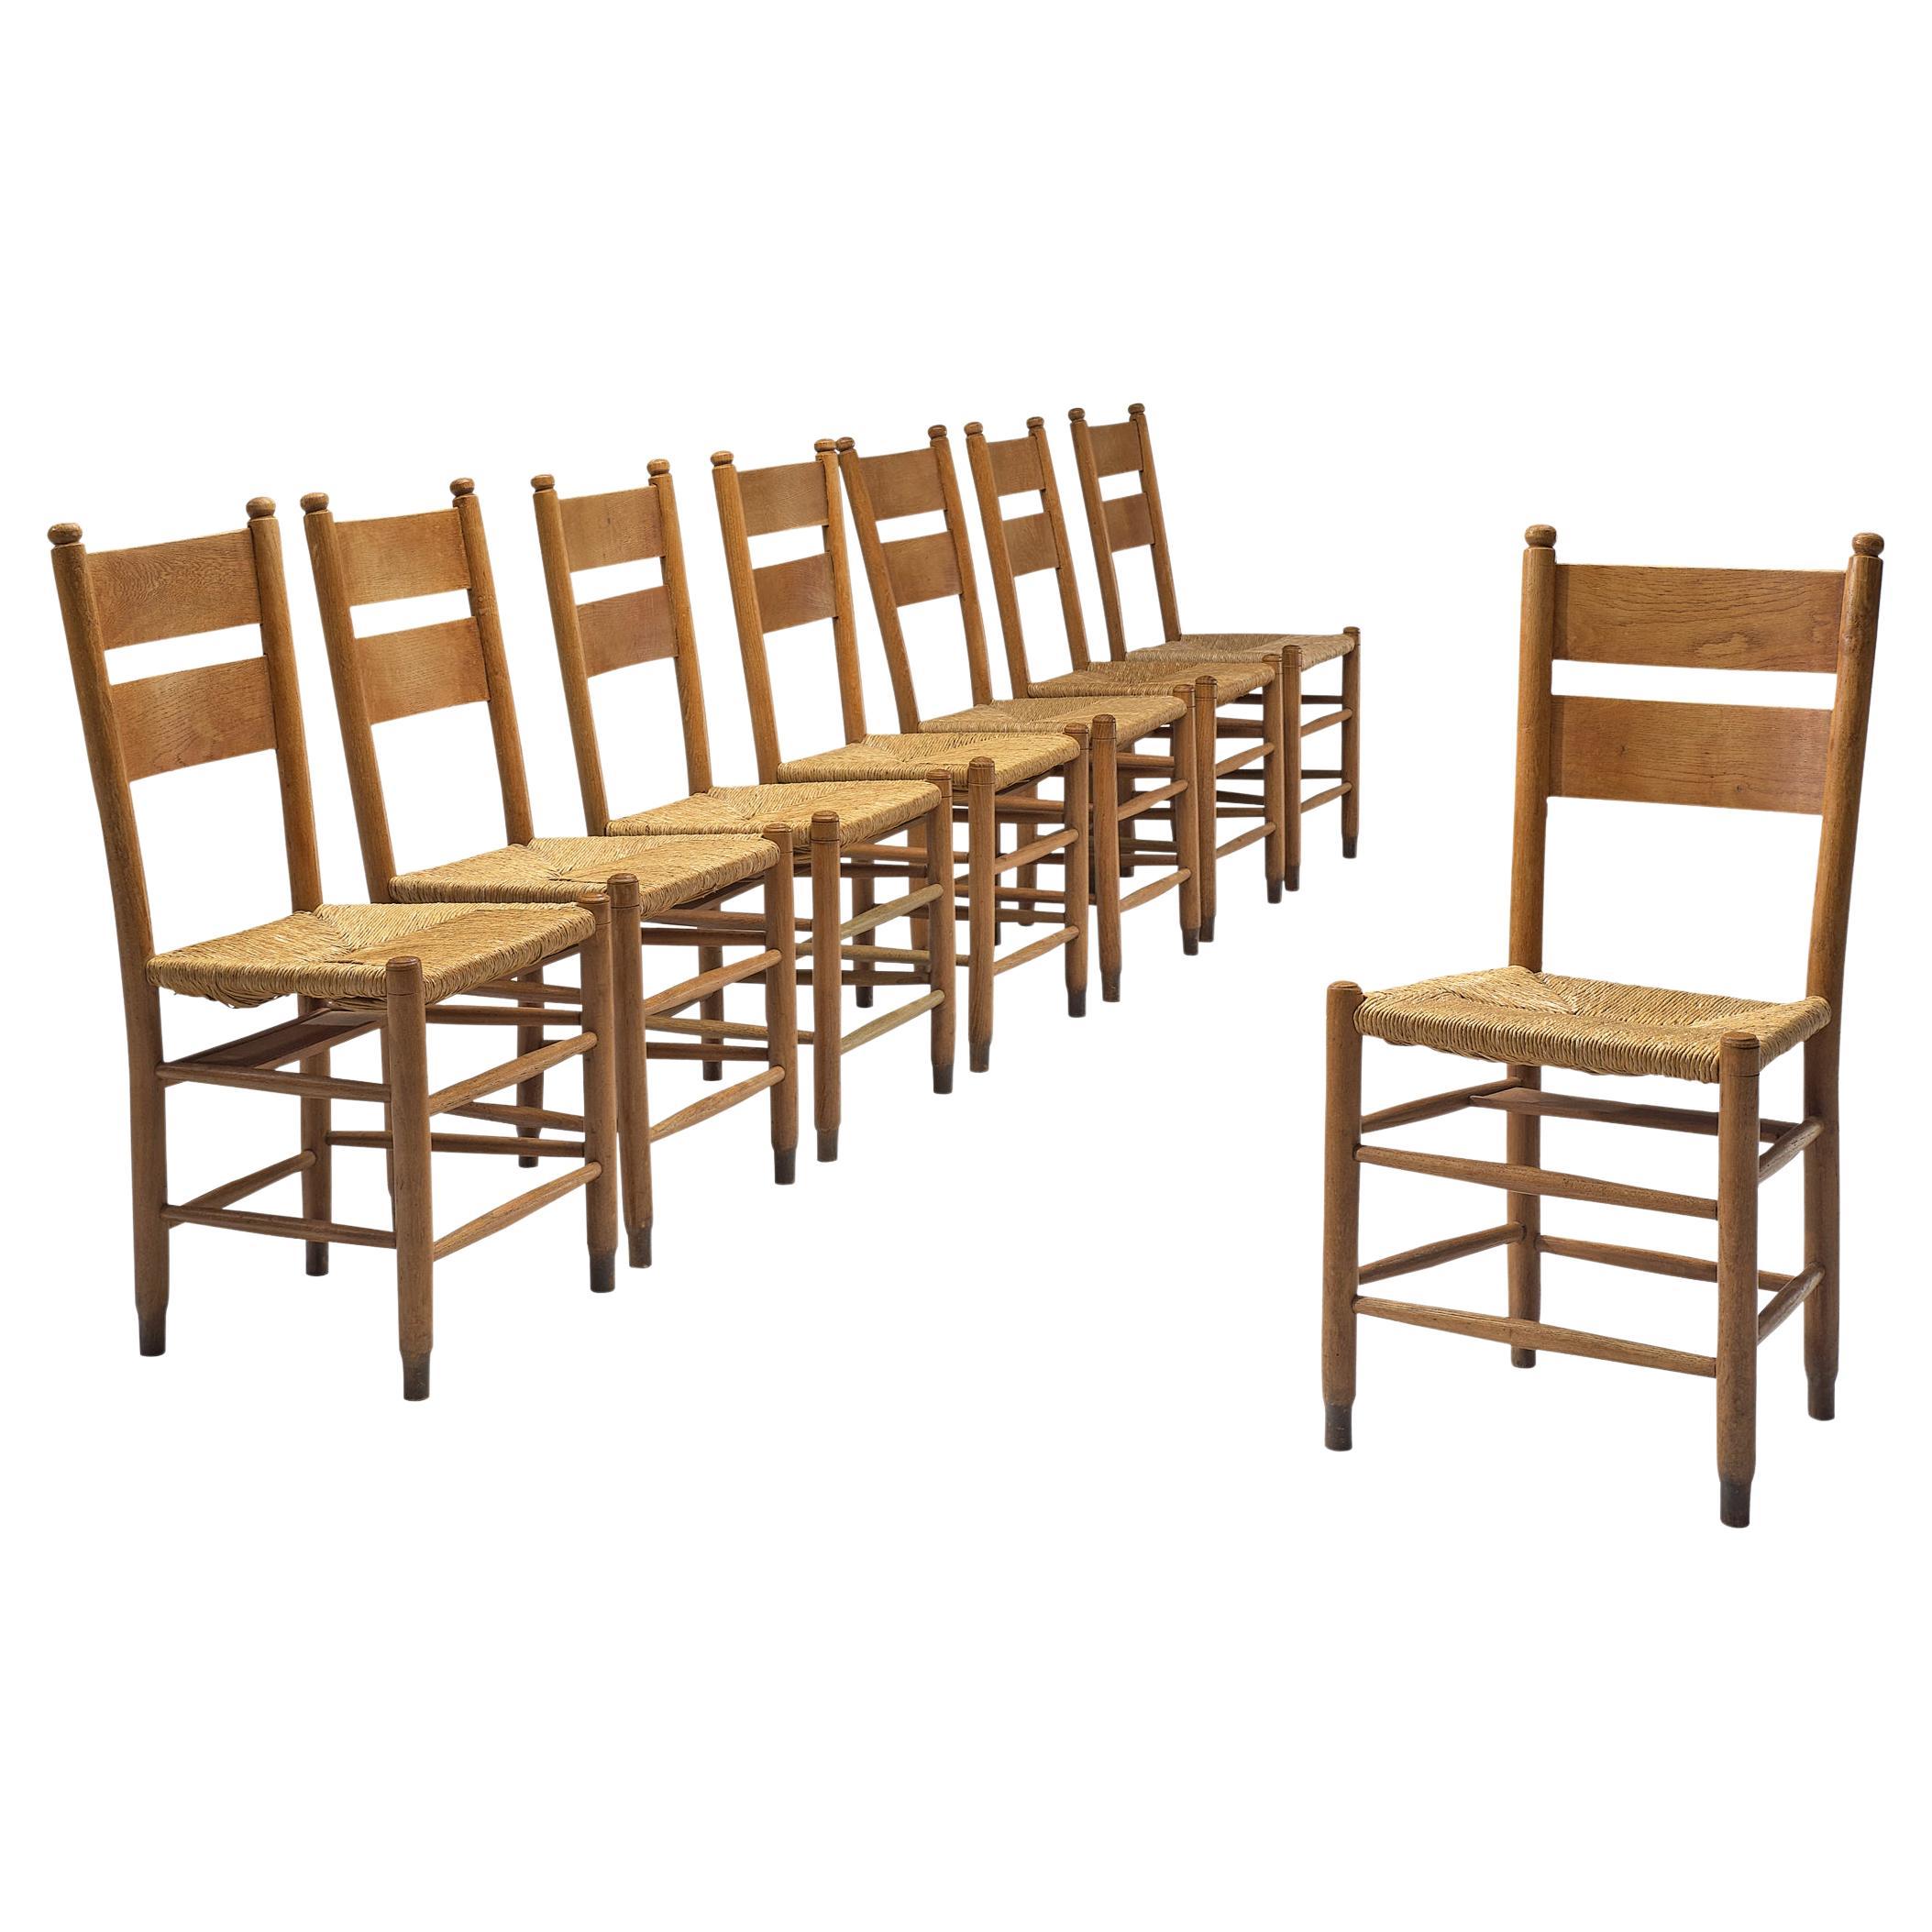 Rustic Danish Chairs in Straw and Oak For Sale